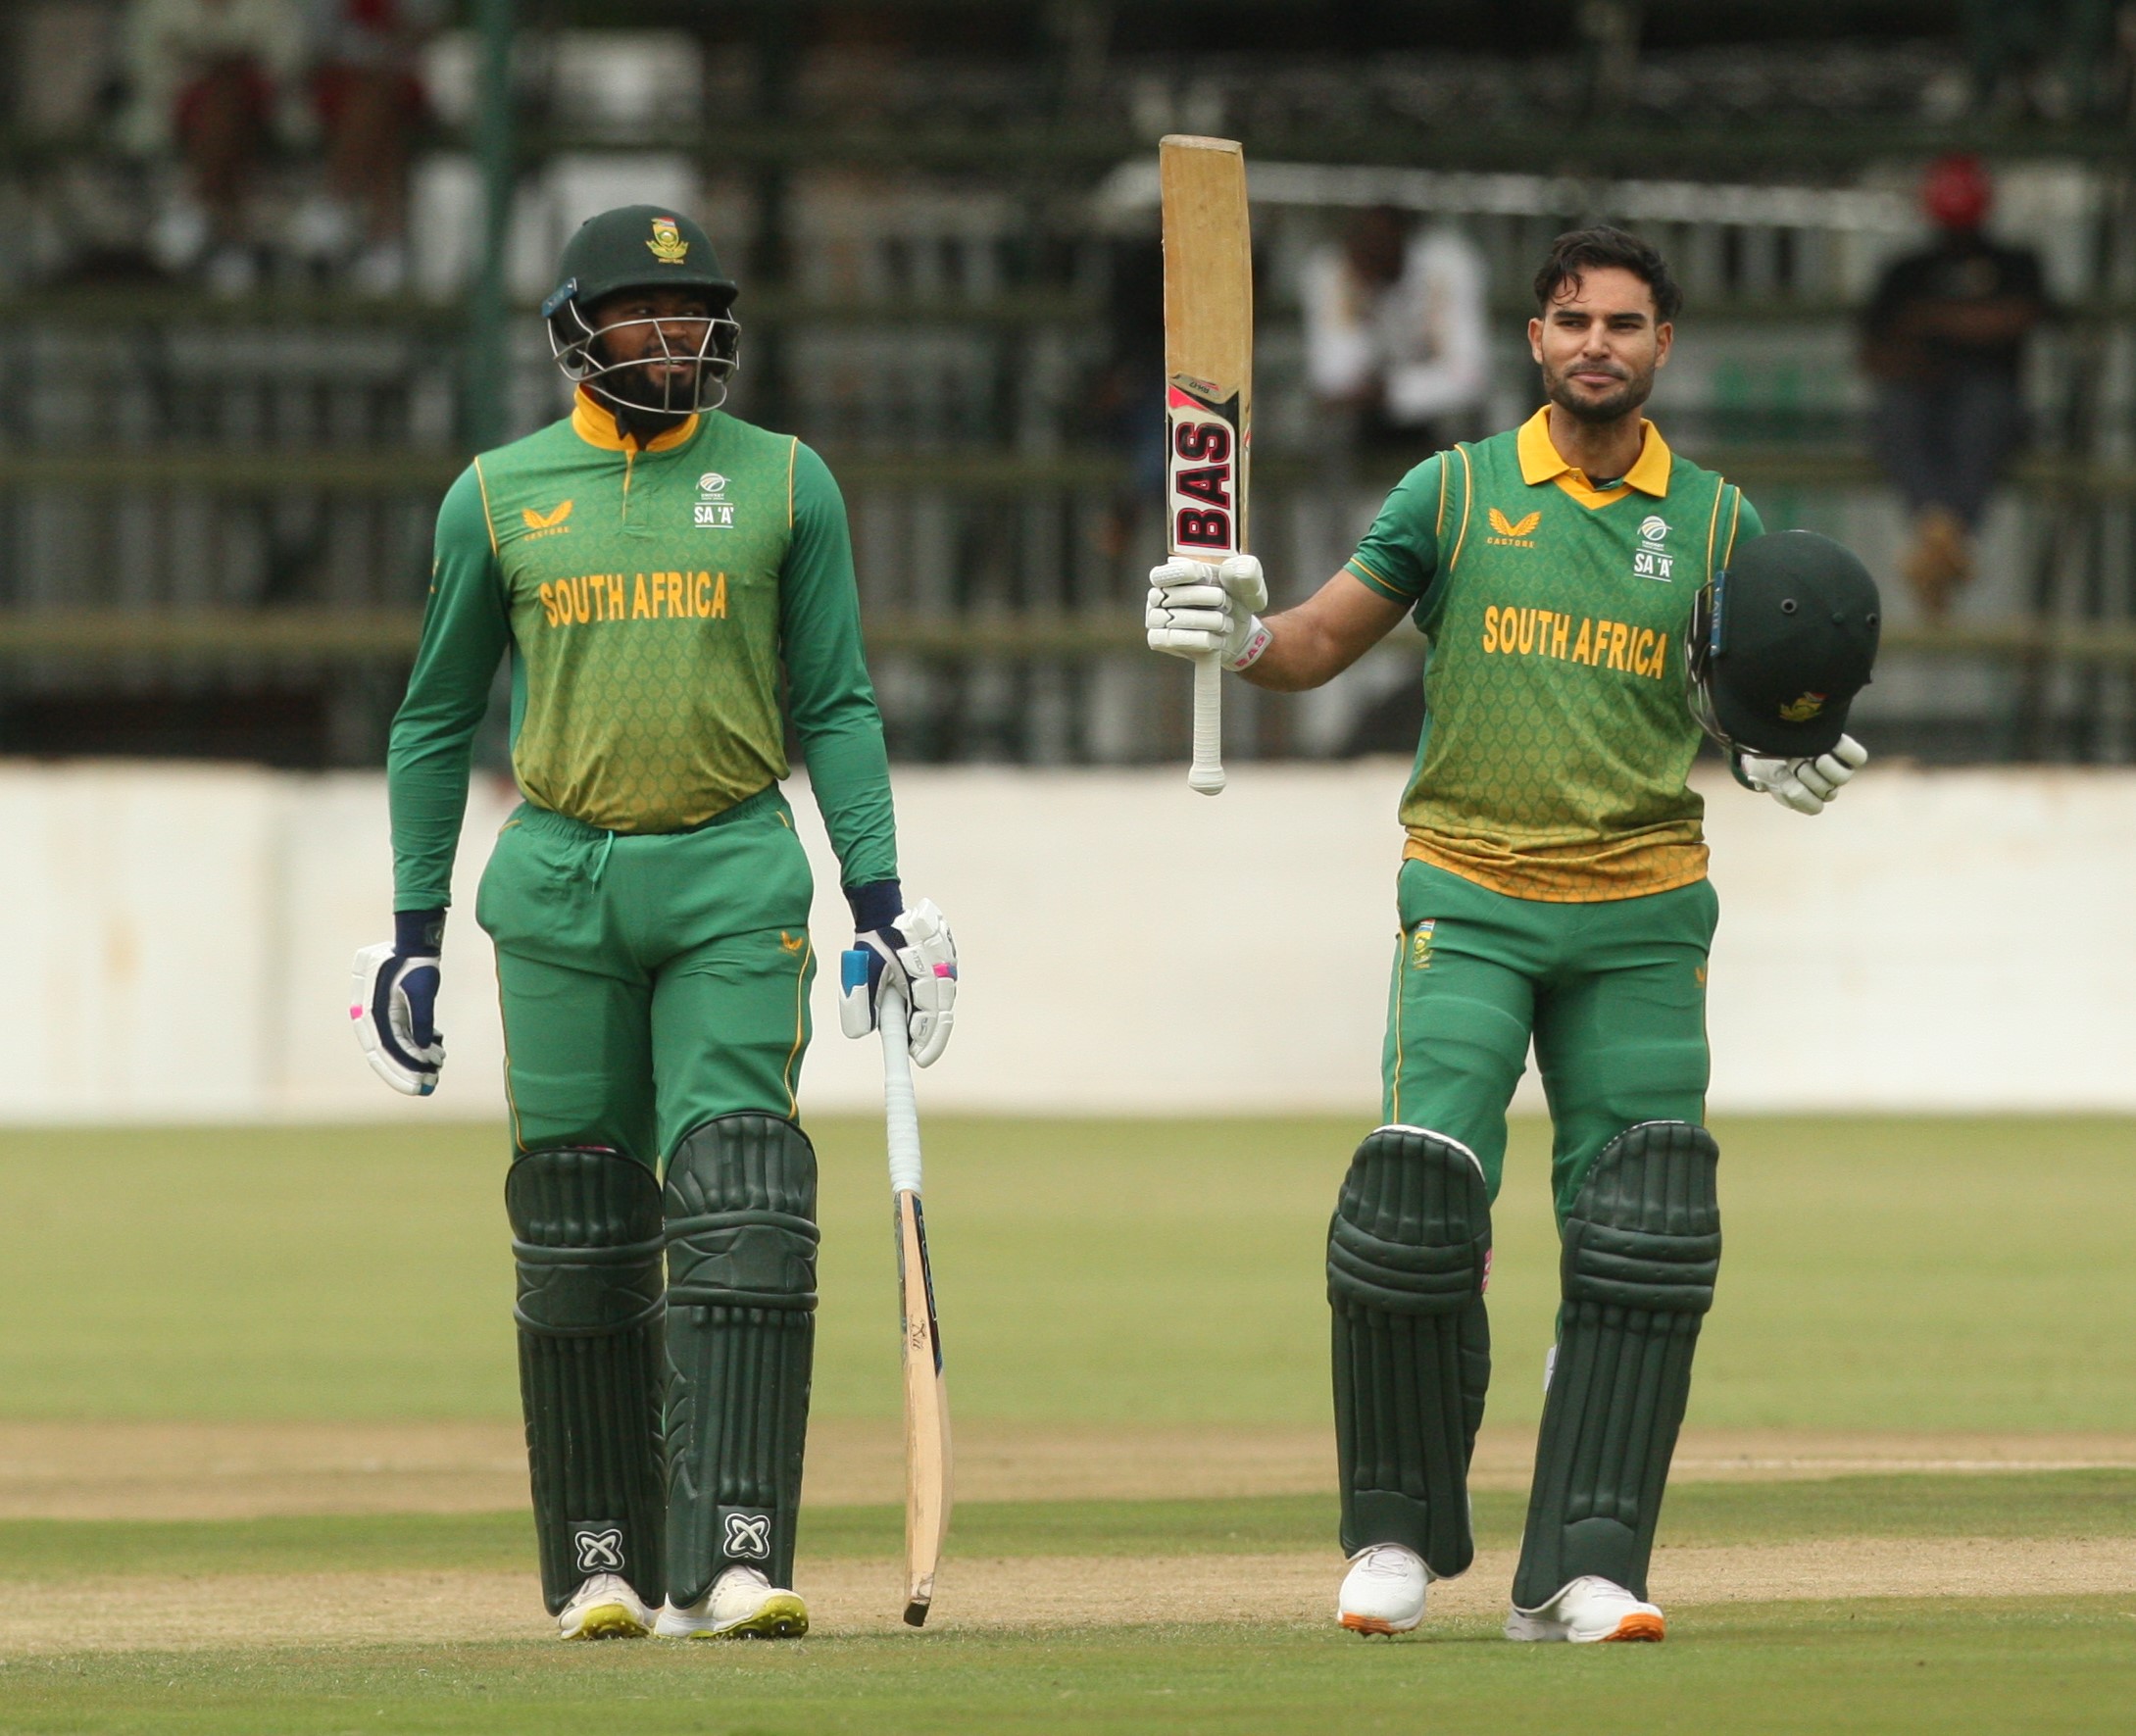 Bad light ends play early as South Africa A level series